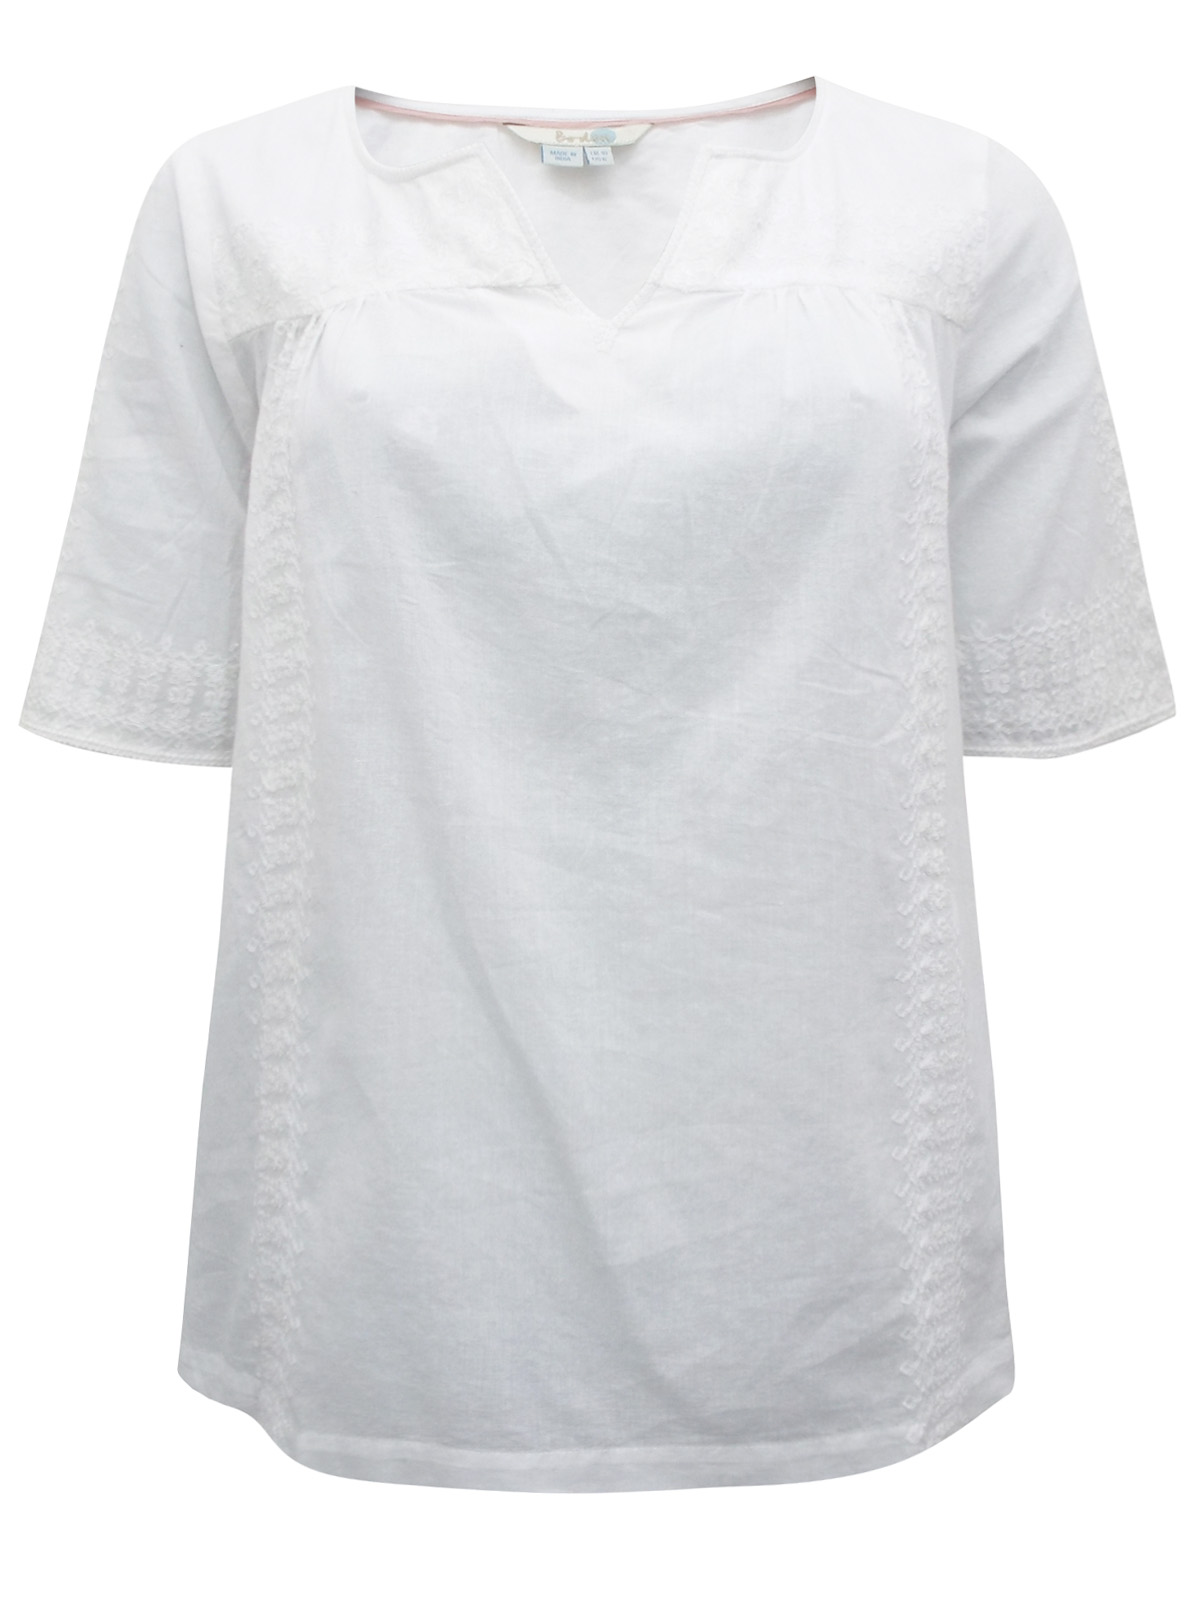 BOD3N WHITE Pure Cotton Embroidered Smock Top - Size 6 to 22